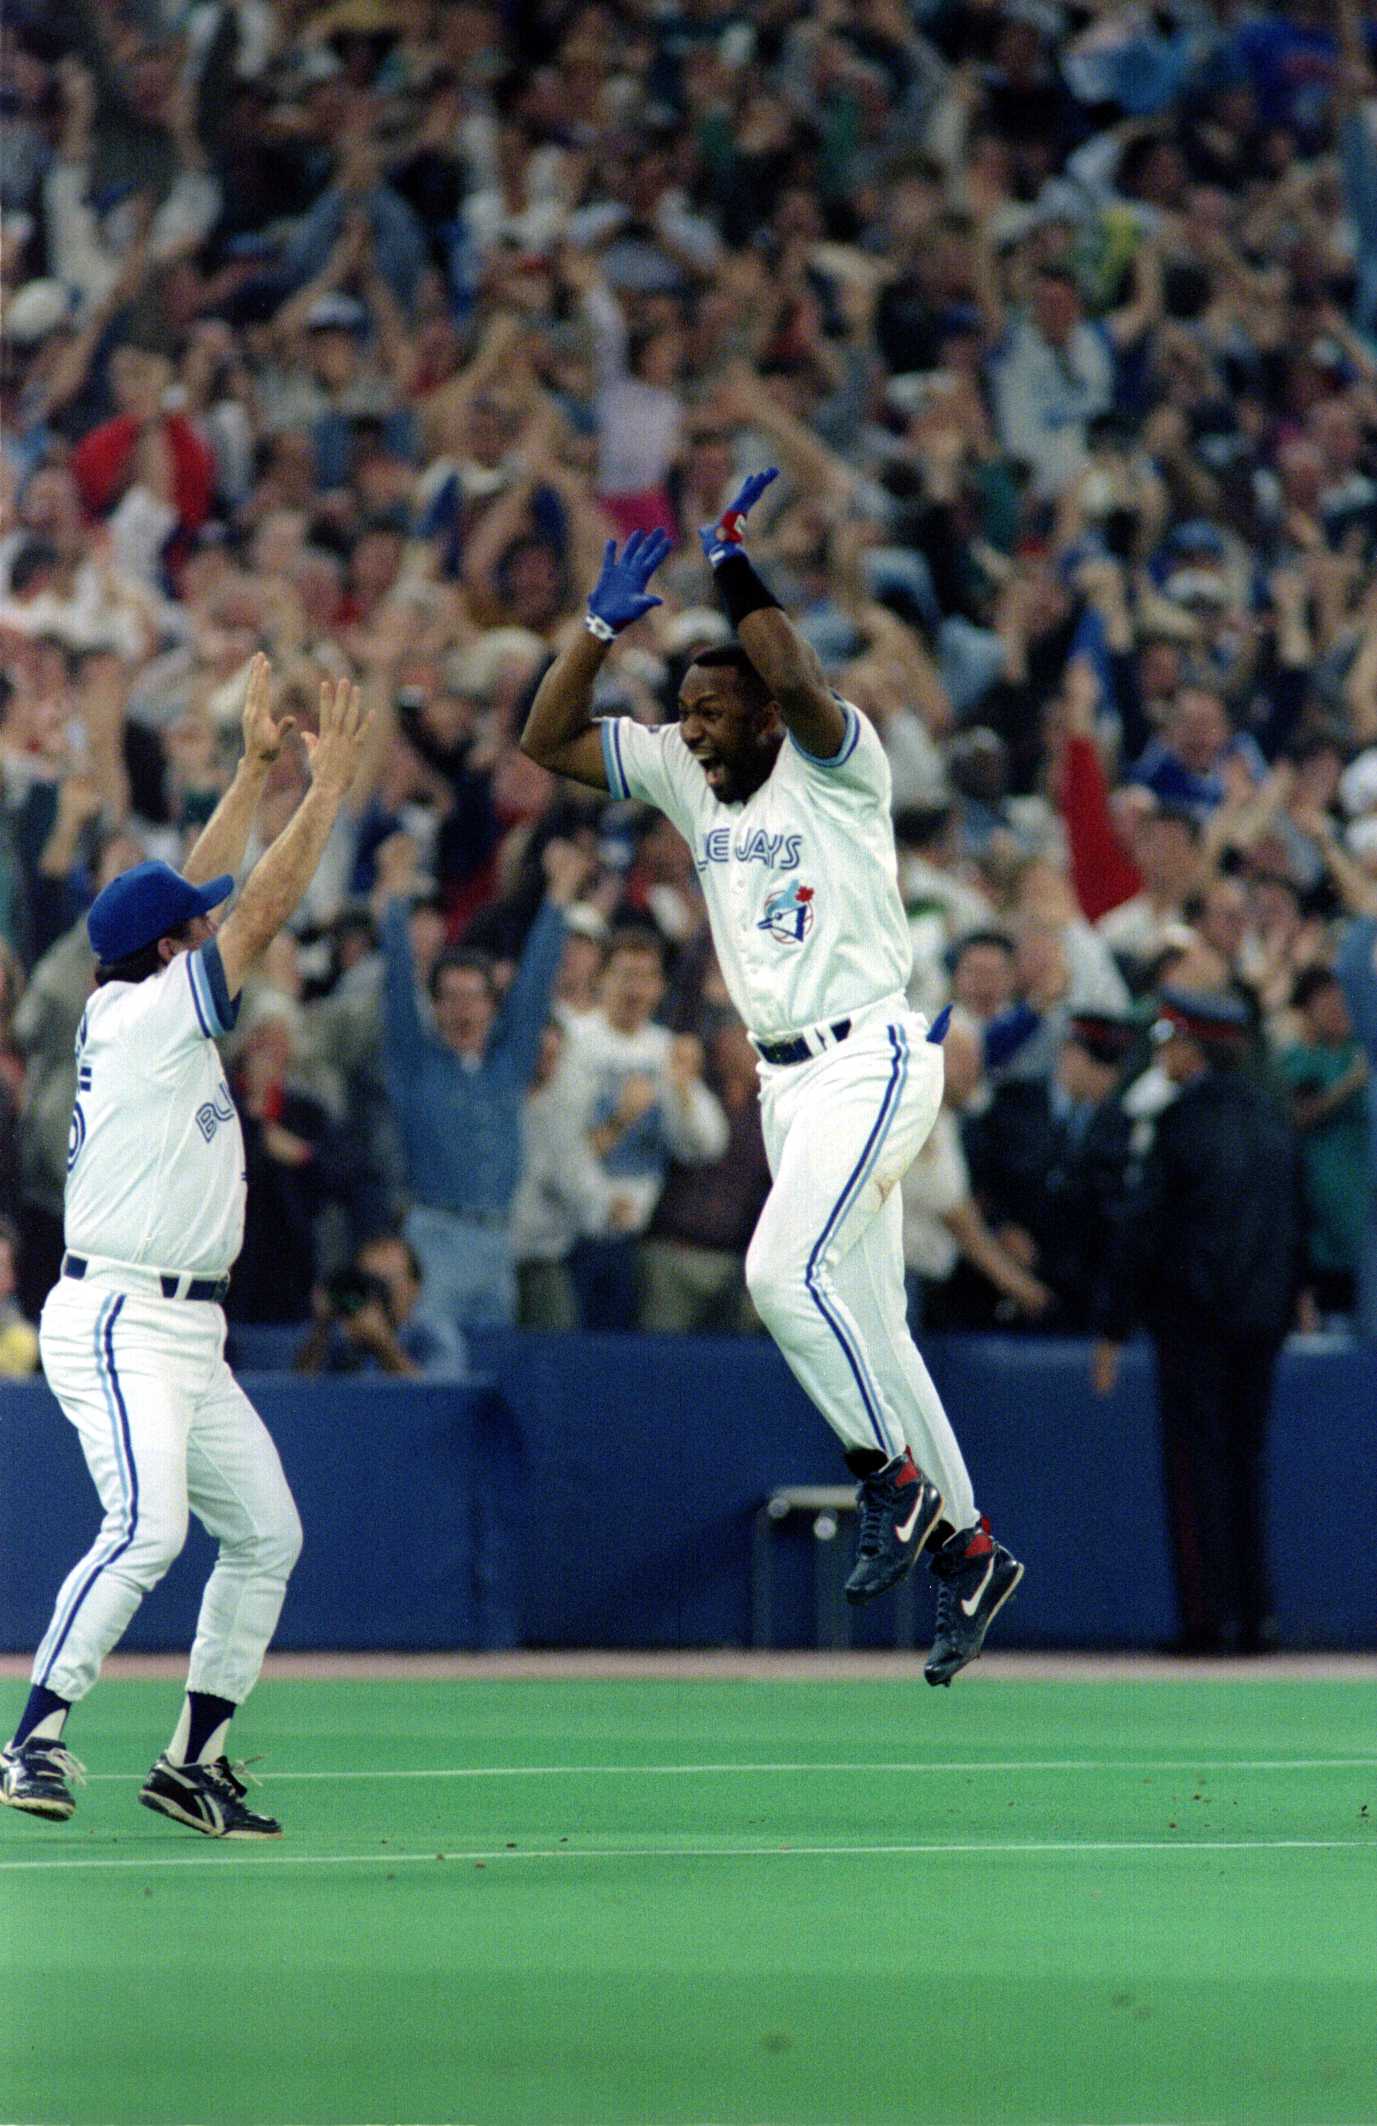 Blue Jays: What happened to Joe Carter's infamous home run ball?